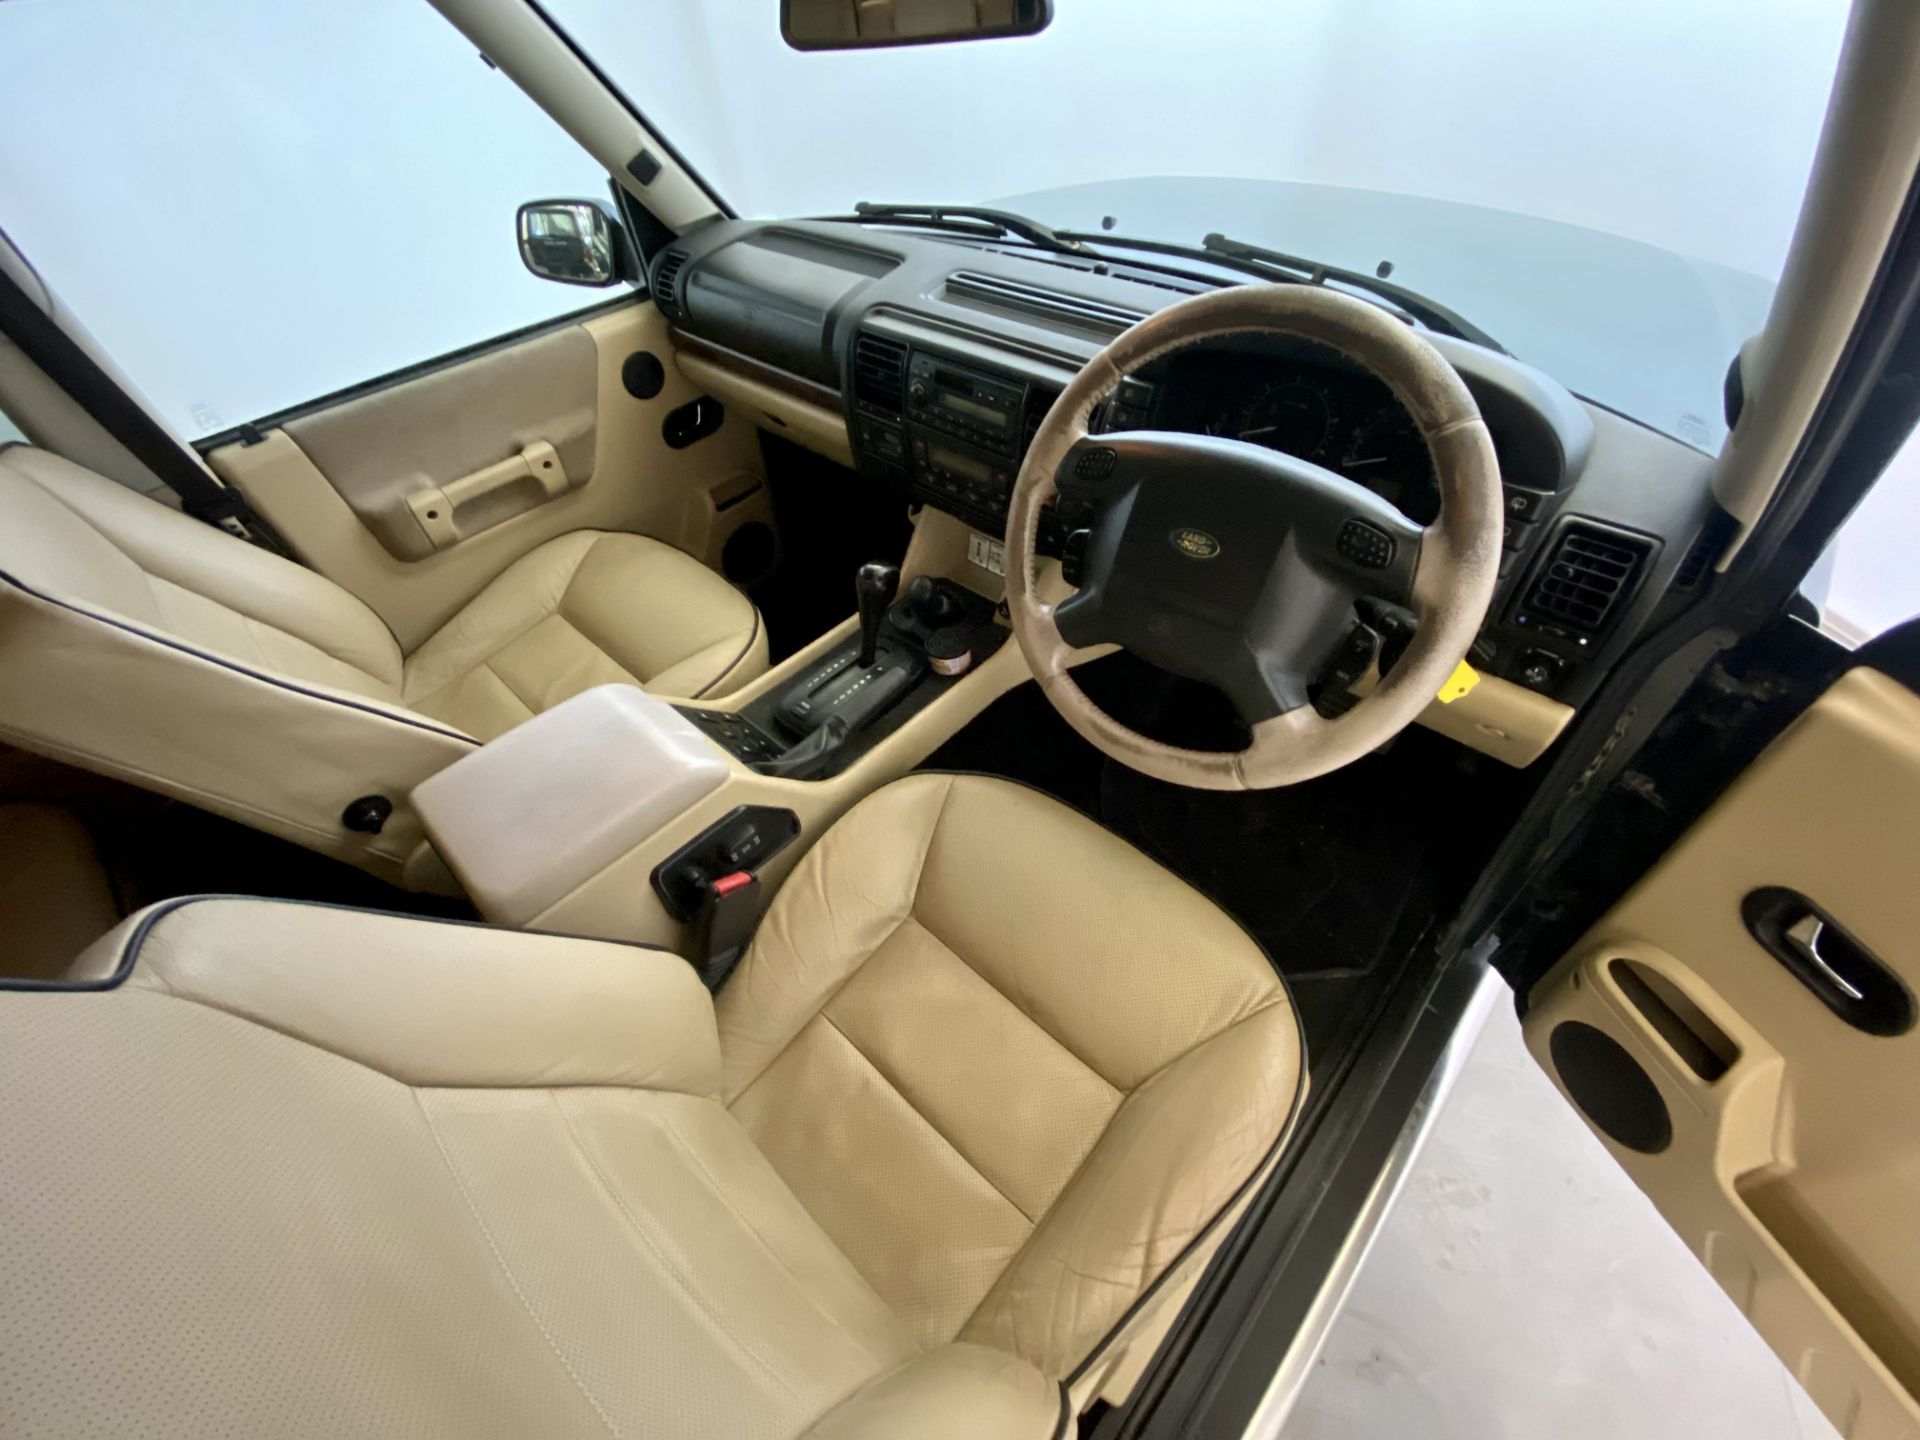 Land Rover Discovery ES - Image 21 of 32